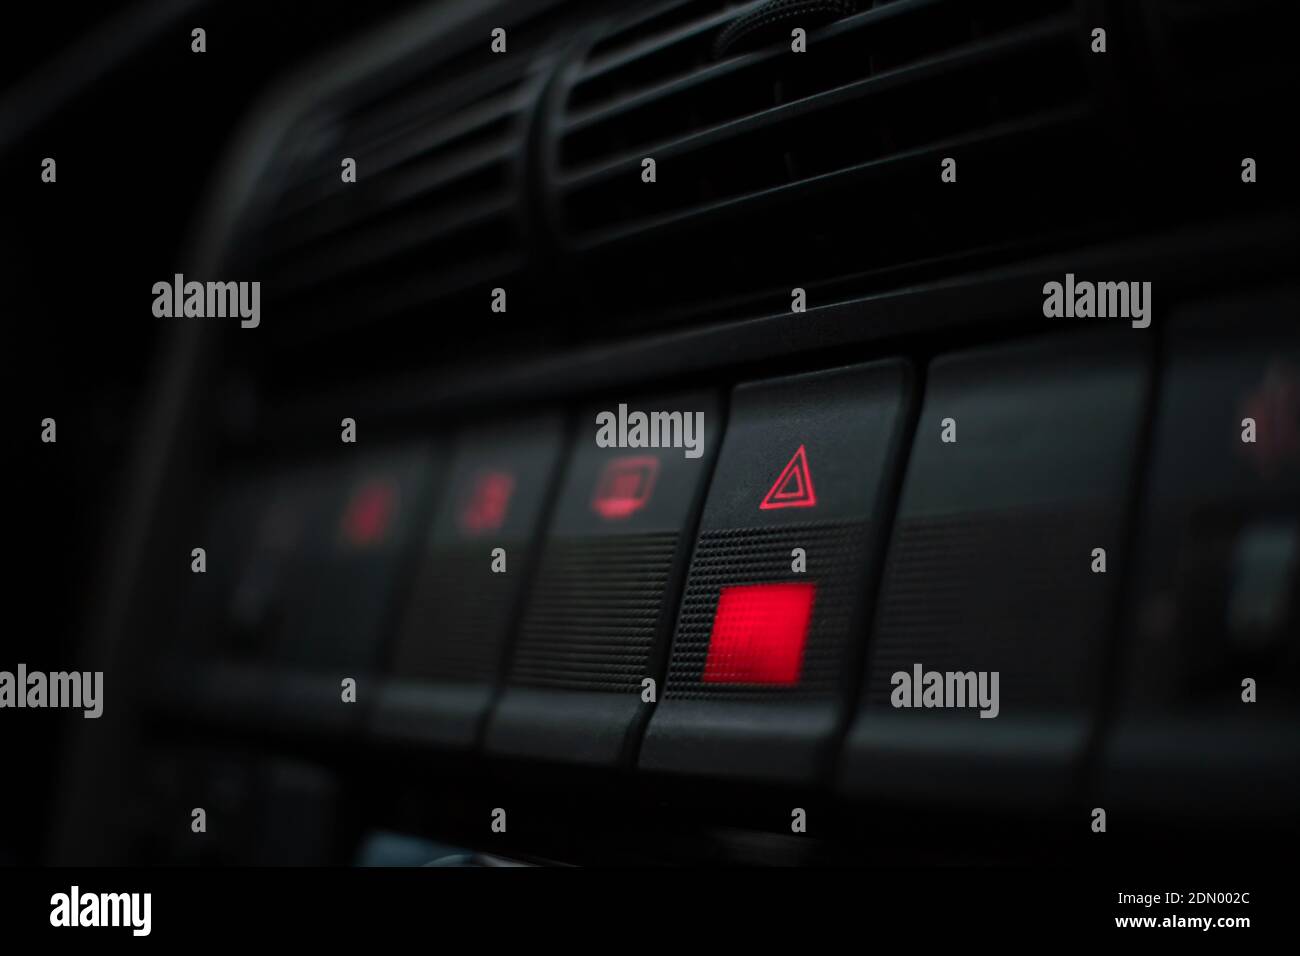 Emergency button highlighted in red on the instrument panel close up Stock Photo